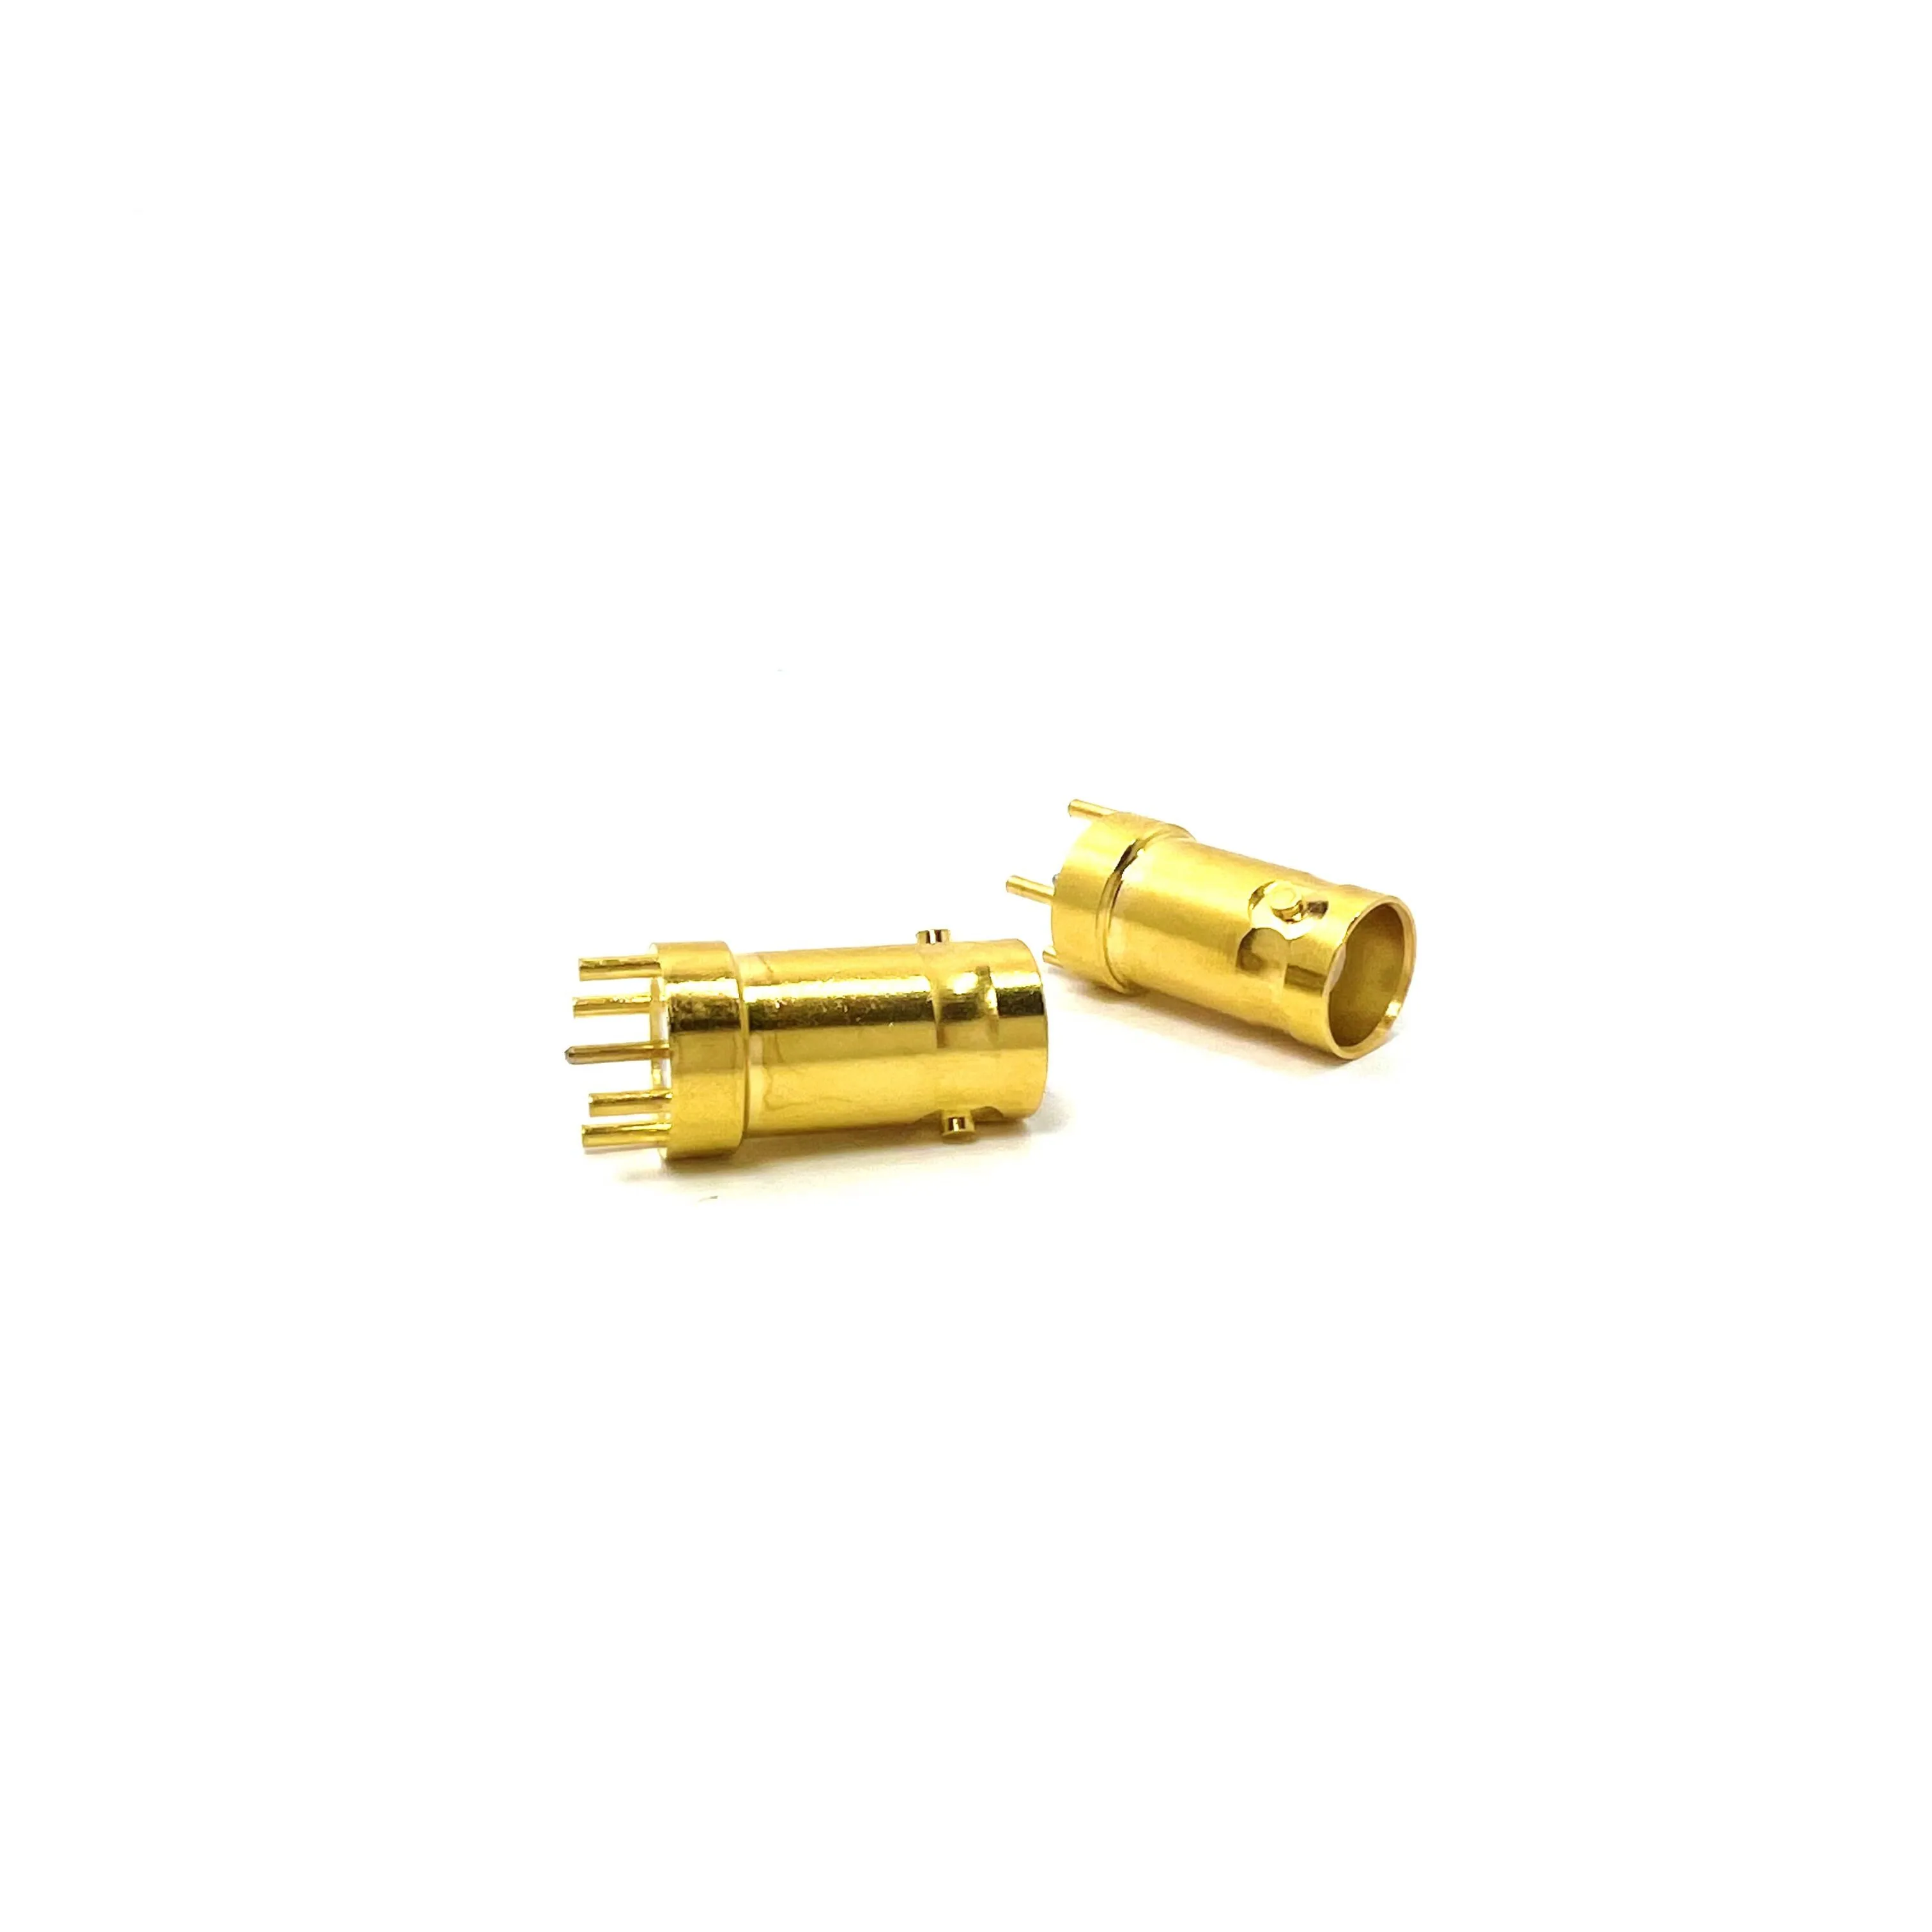 RF Connector Gold Plating BNC Female Printing PCB board Video Socket DC to 4GHz PCB Mount Connector with Post Terminal 4 Stud